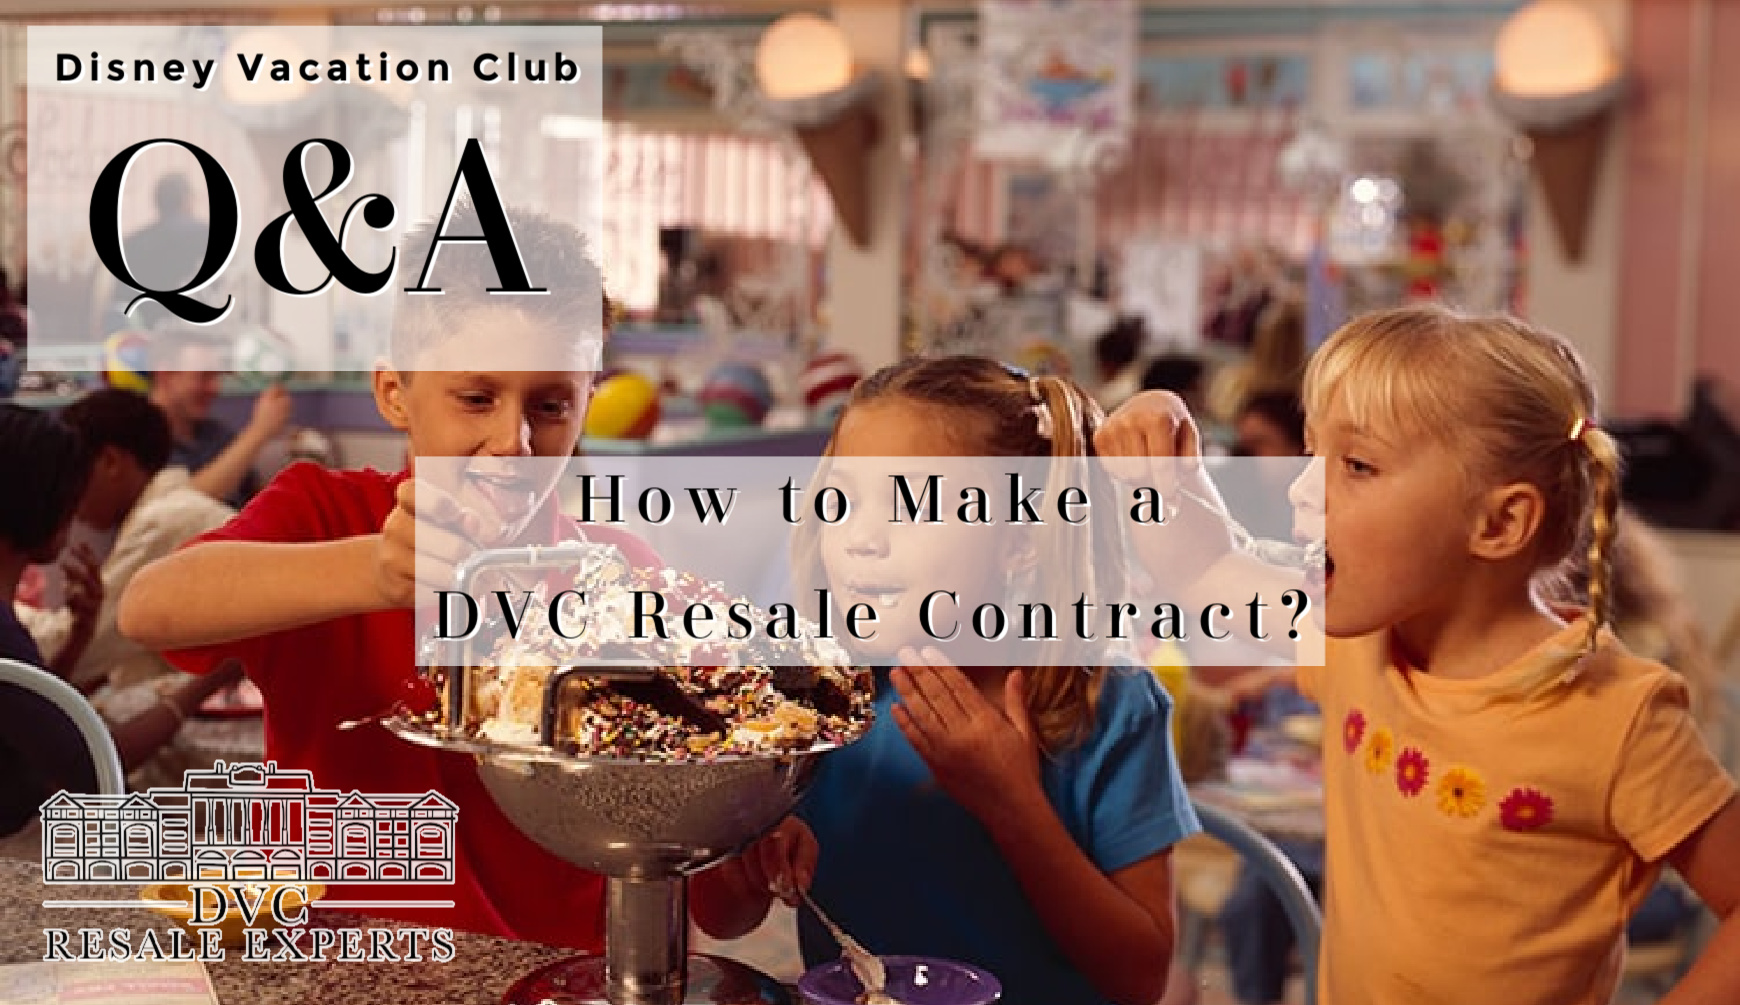 How to Make a DVC Resale Contract